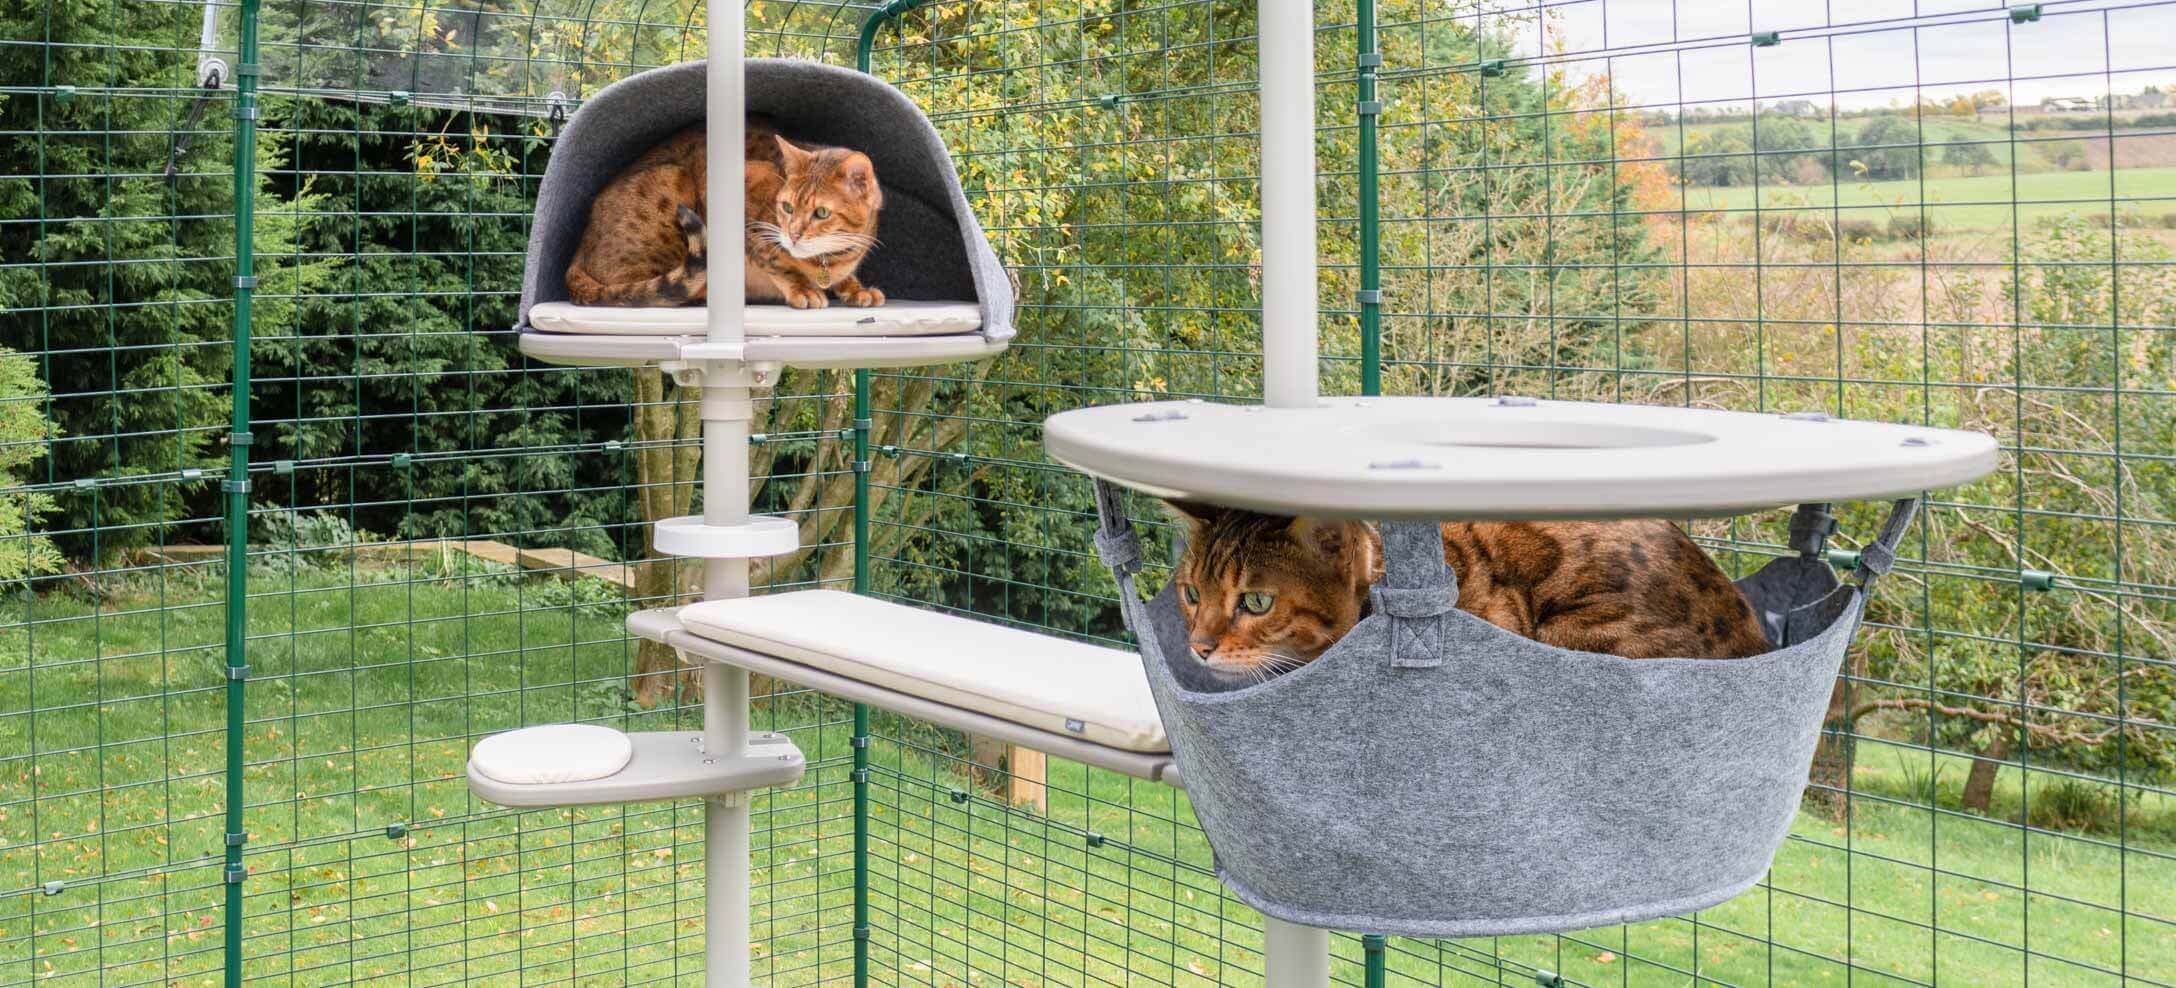 Two Bengal cats sat in a den and a hammock on outdoor cat tree